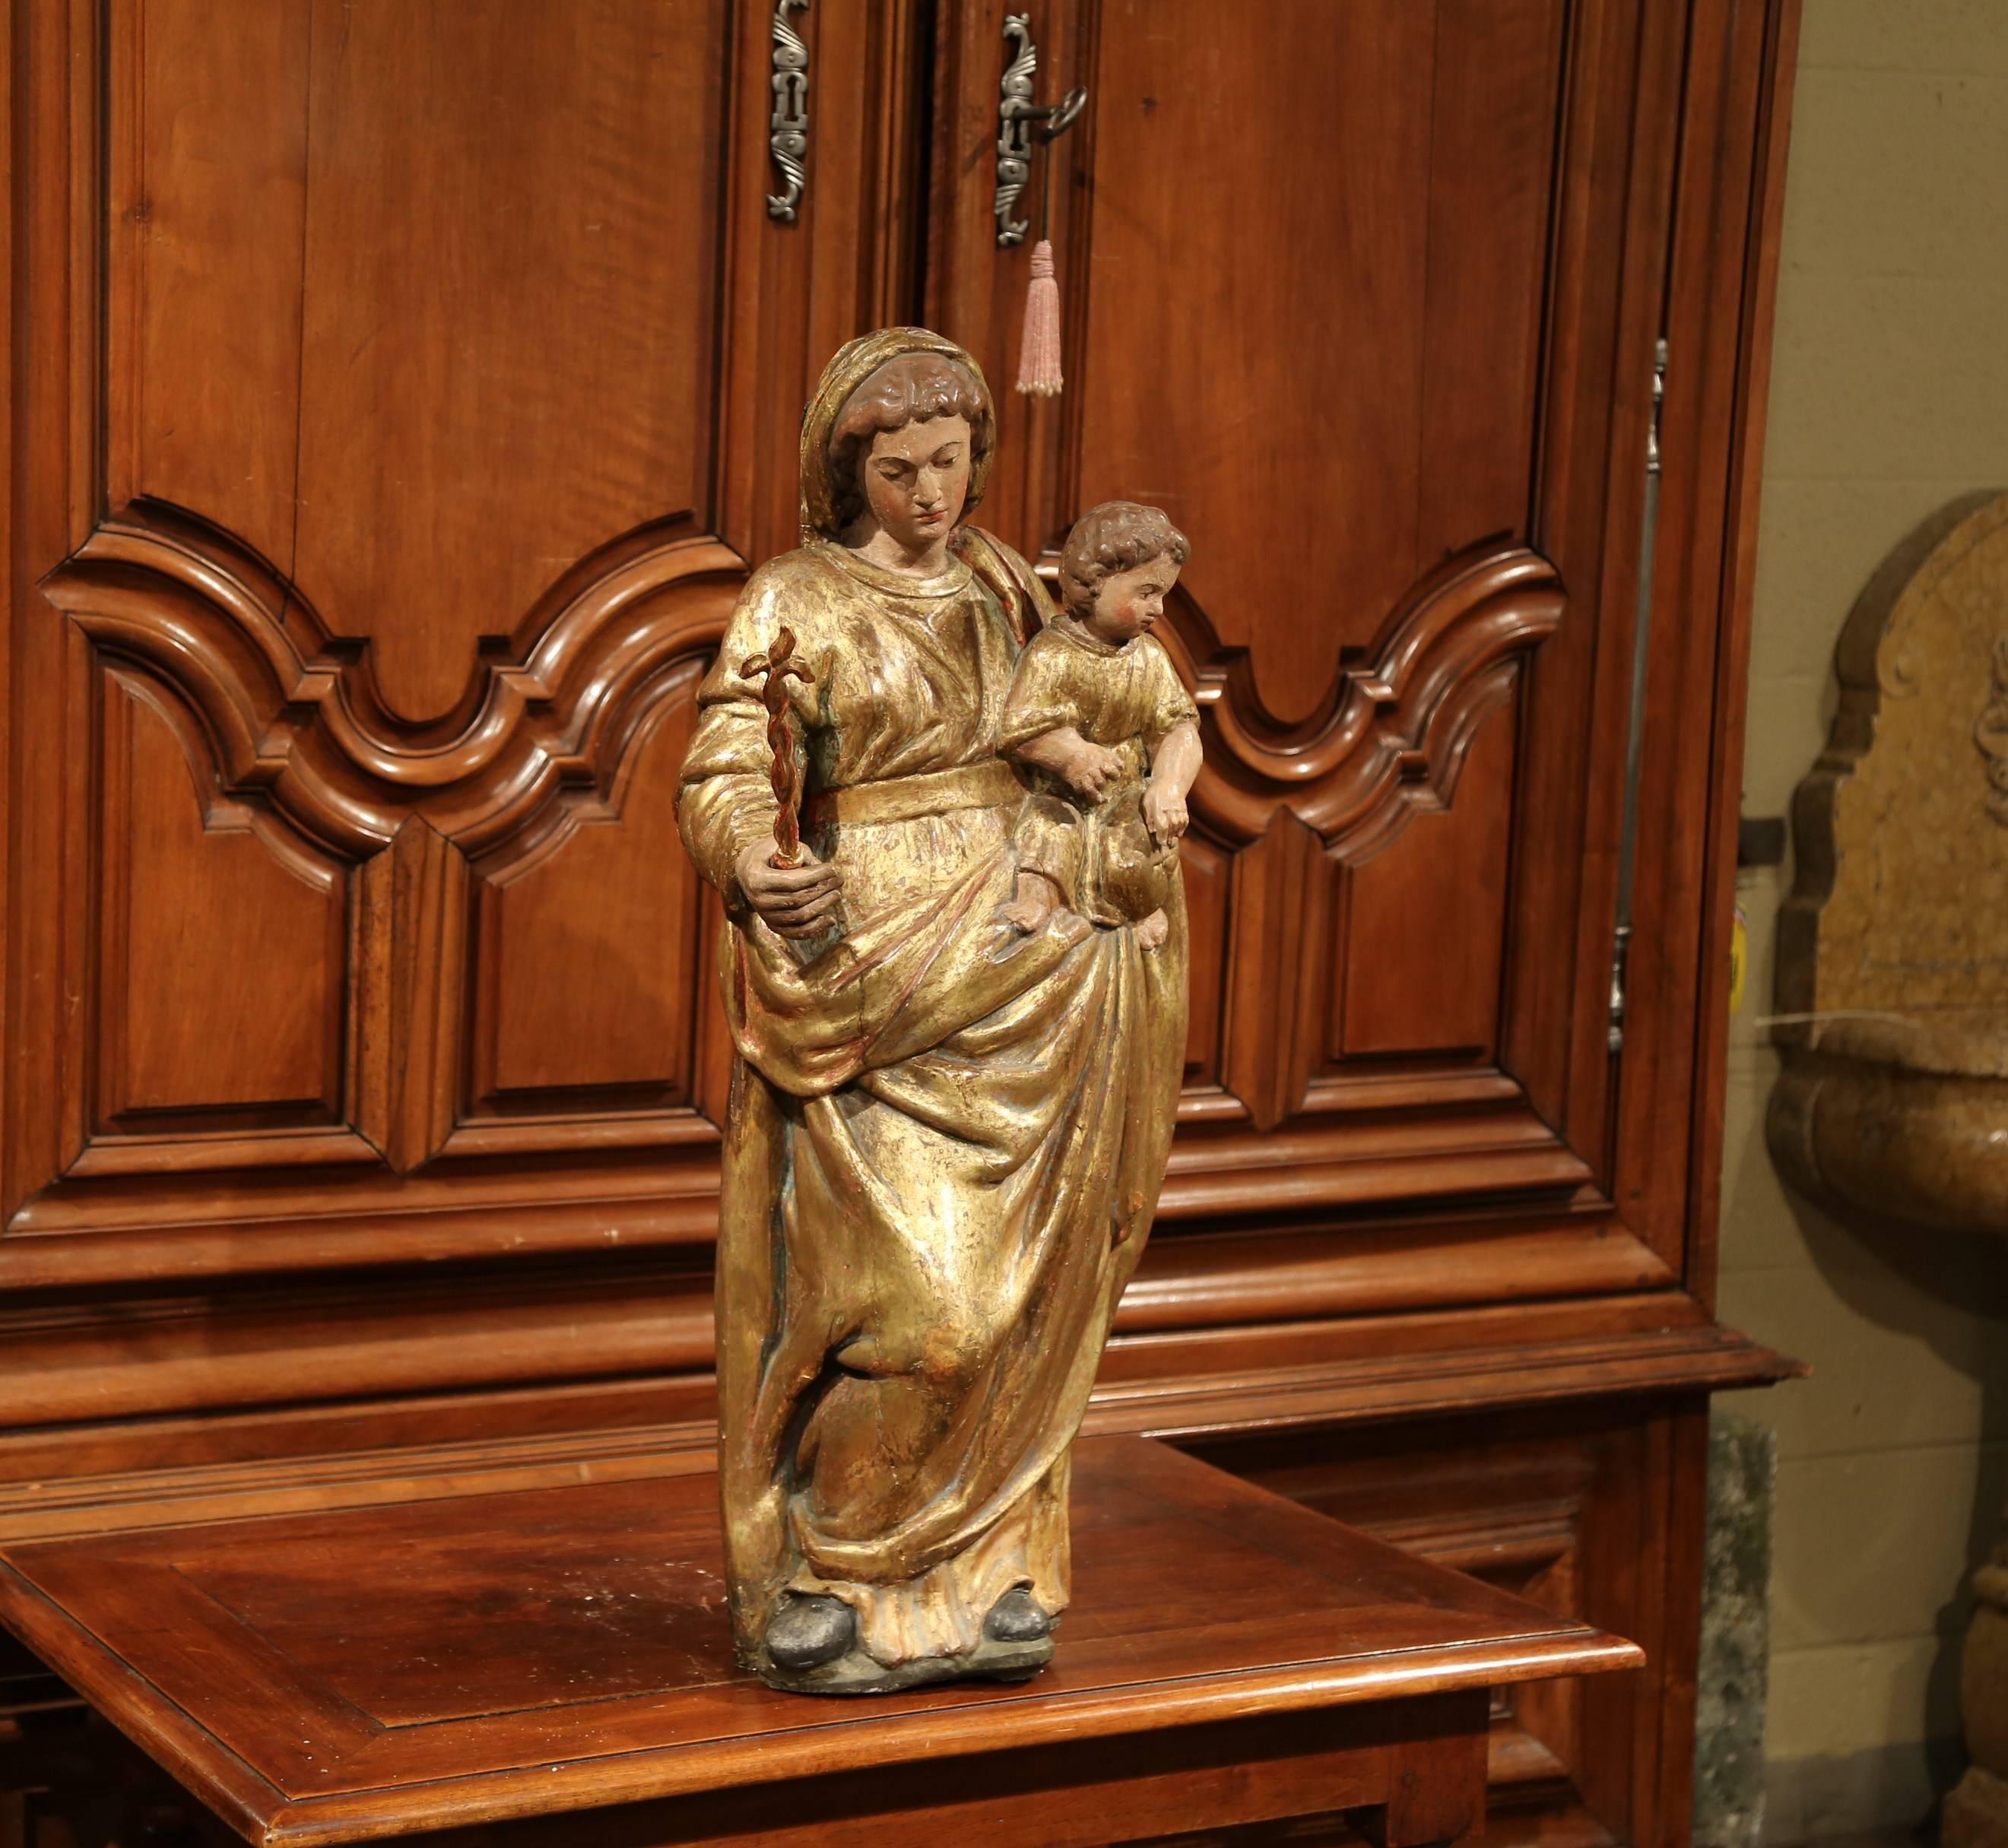 This beautiful antique statue of the Virgin Mary with baby Jesus was carved in France, circa 1750. The alluring polychrome and gilt high relief sculpture features Madonna carrying her Child. The tall religious figure has wonderful detailed carving